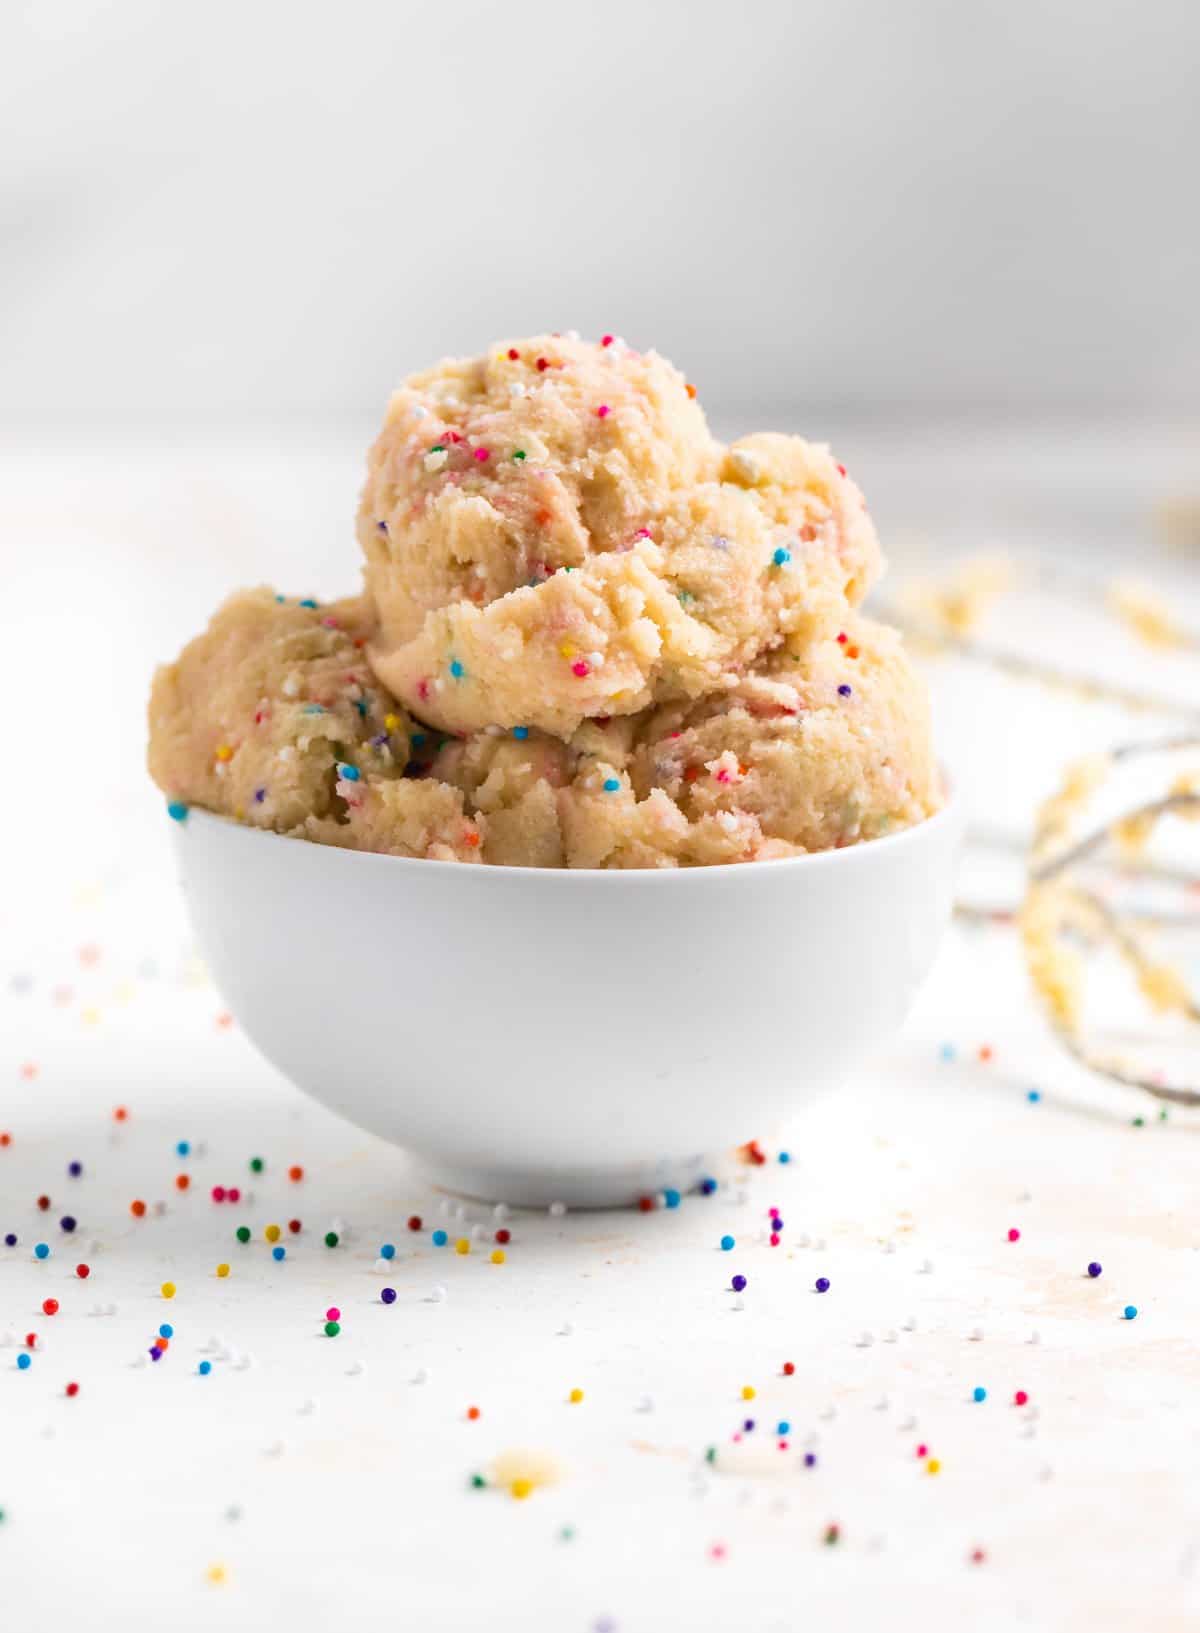 Bowl of sugar cookie dough scooped with funfetti sprinkles.